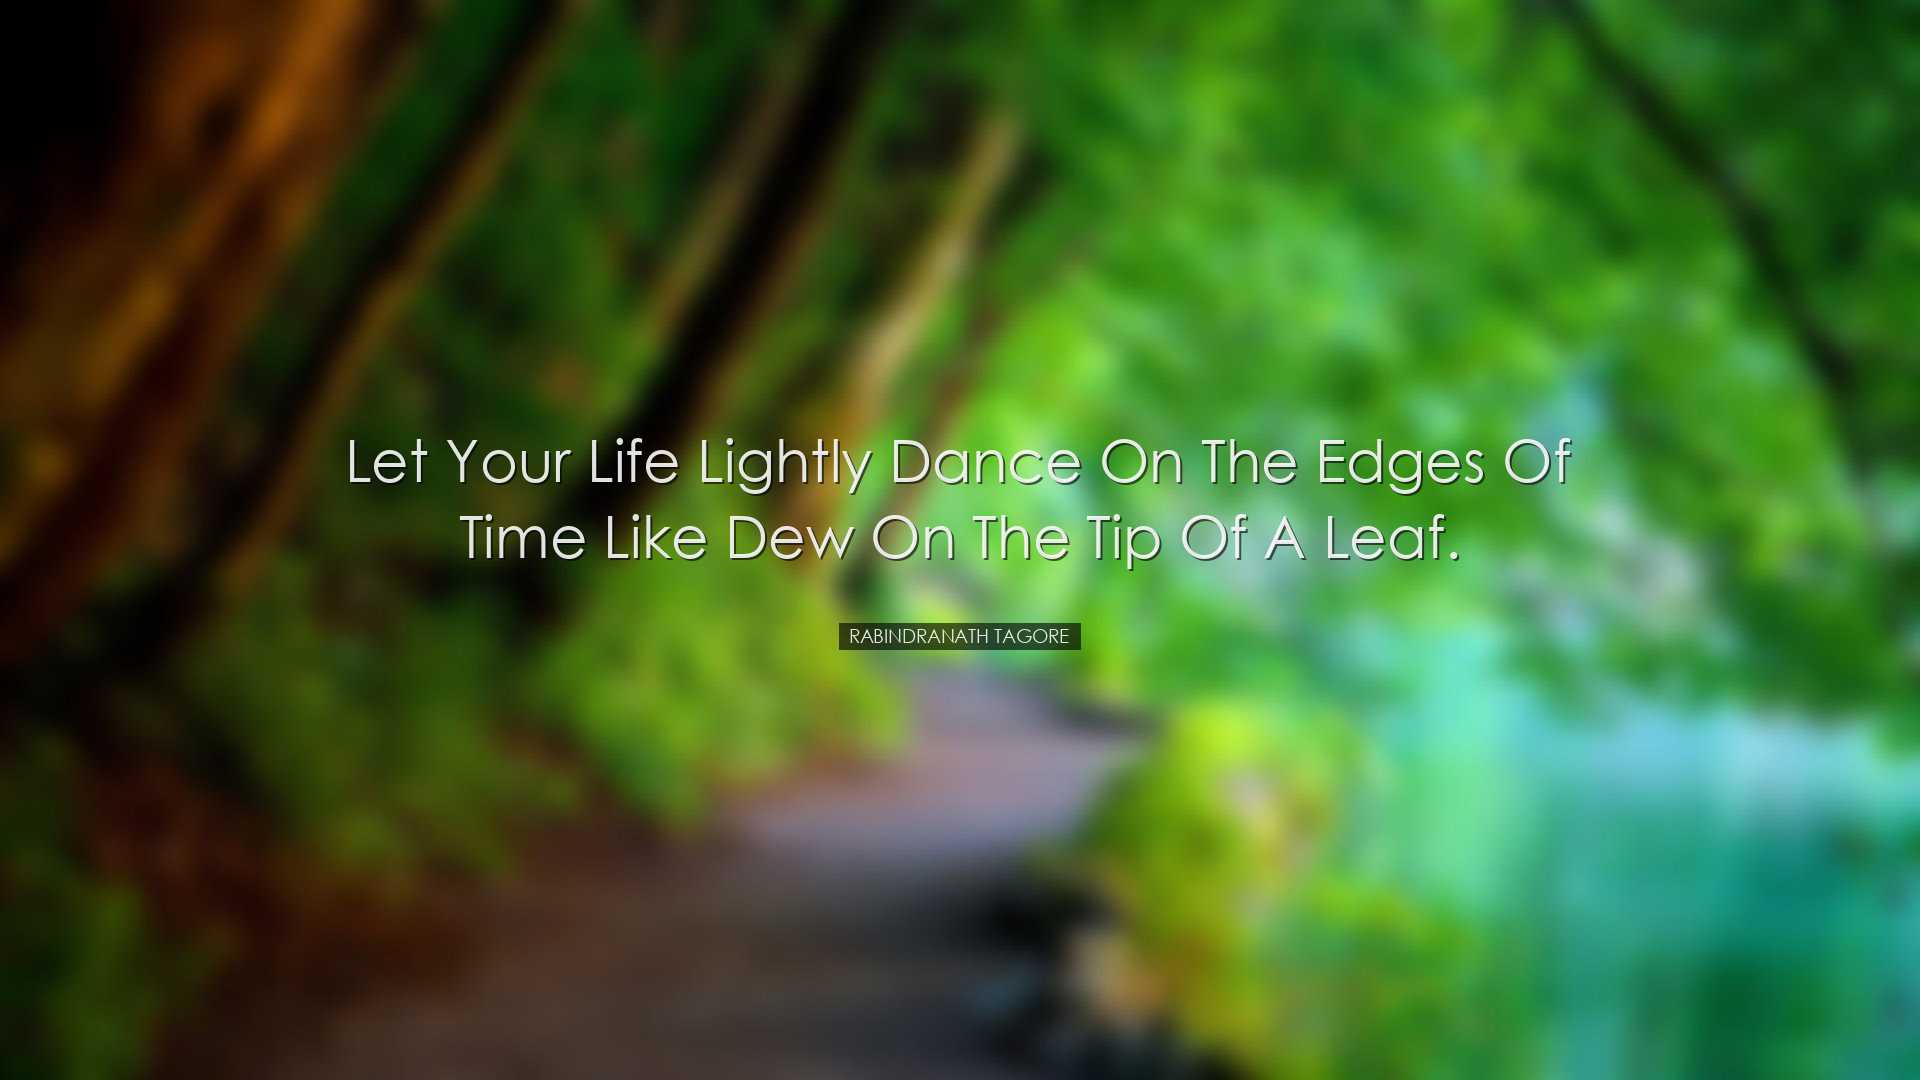 Let your life lightly dance on the edges of Time like dew on the t